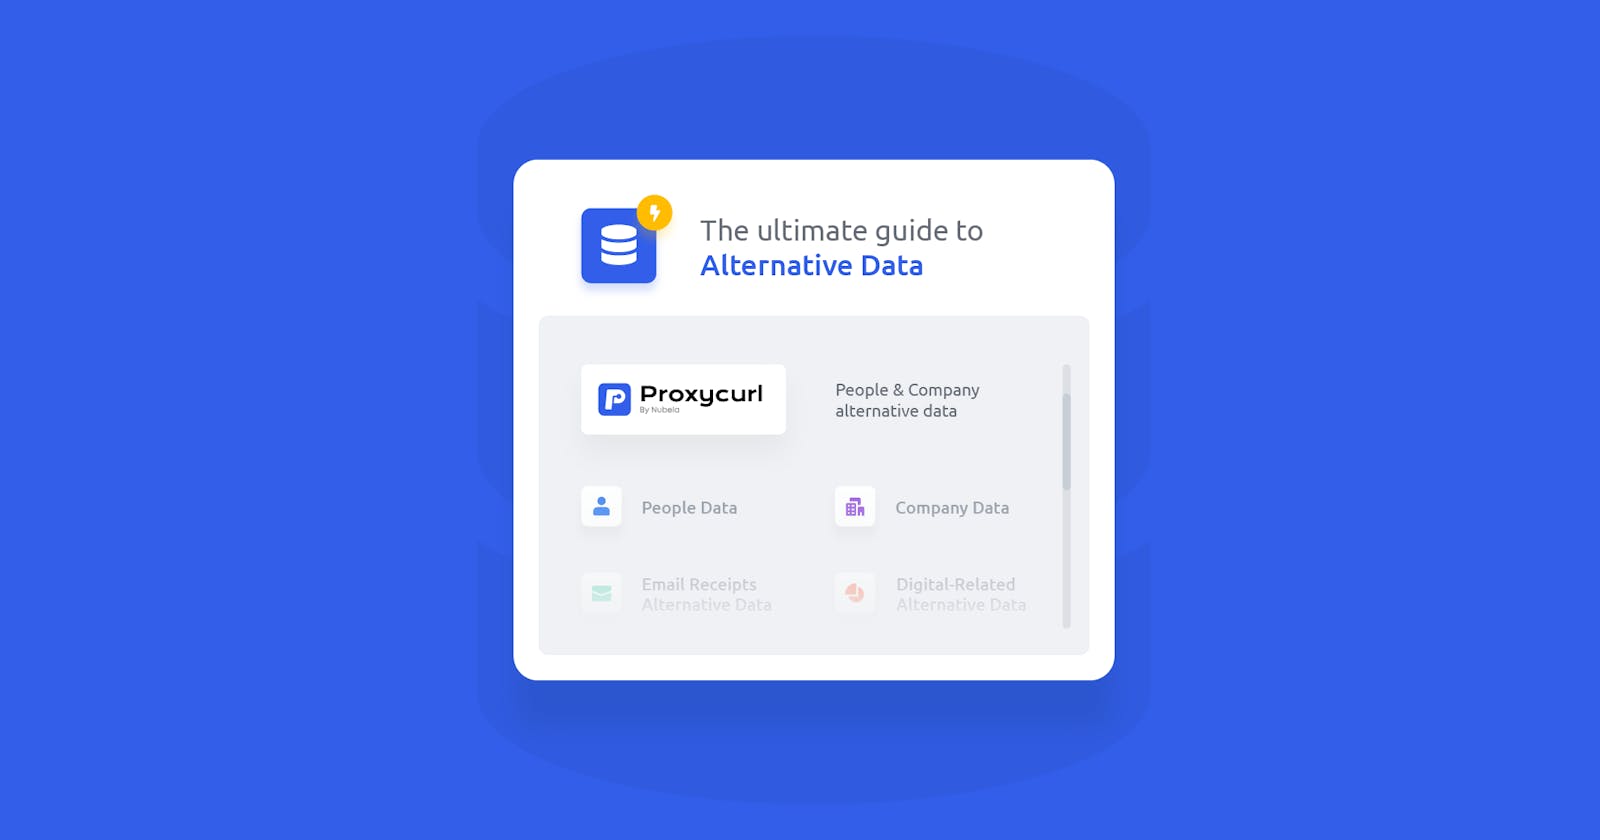 The Ultimate Guide to Alternative Data - What Is It Really